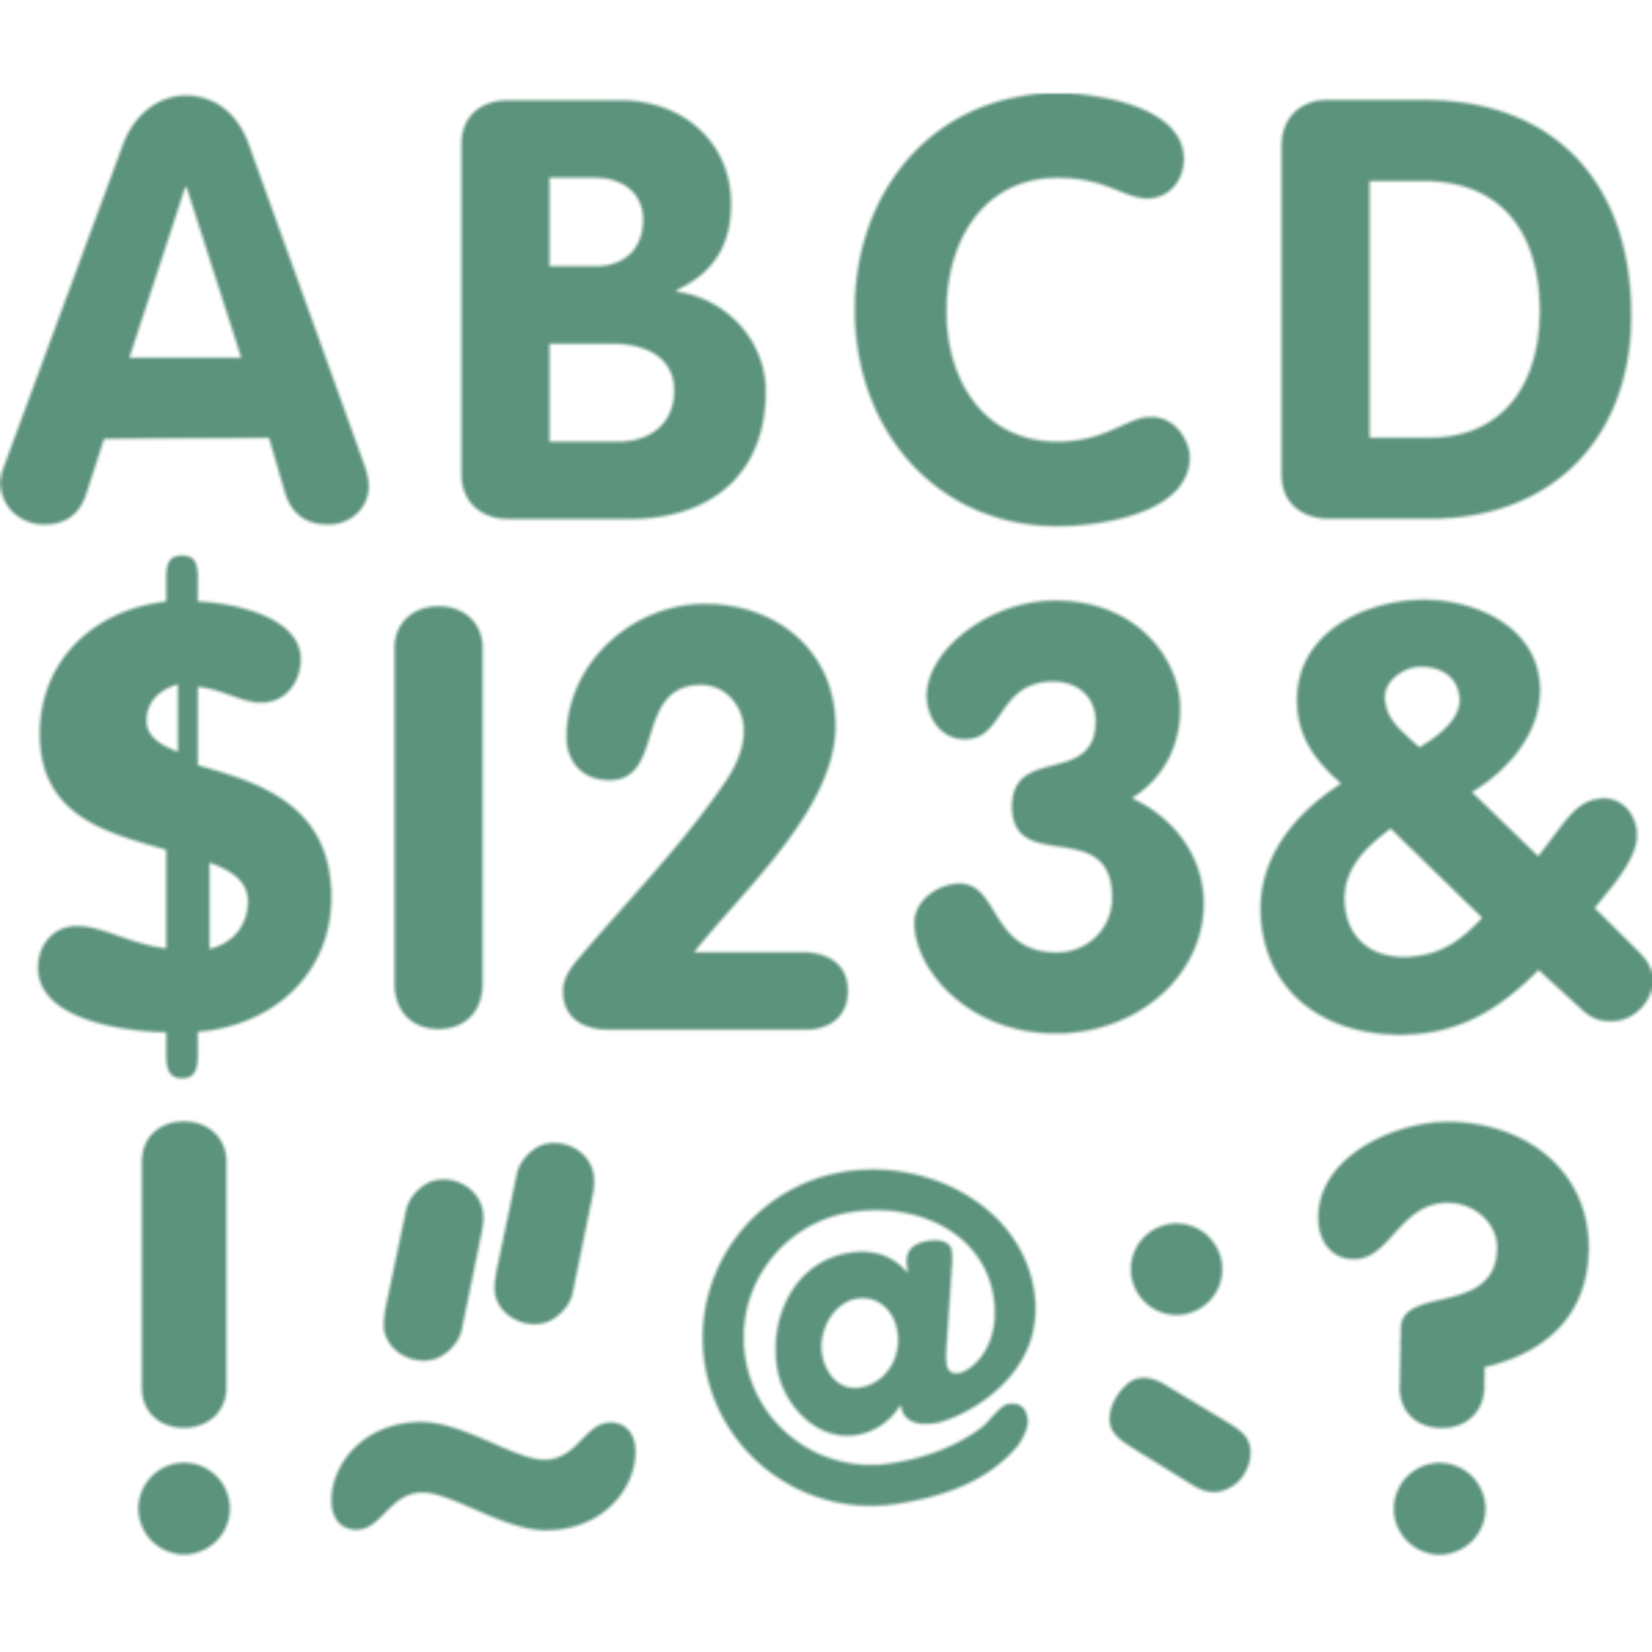 TEACHER CREATED RESOURCES Eucalyptus Green 2" Classic Letters Uppercase Pack